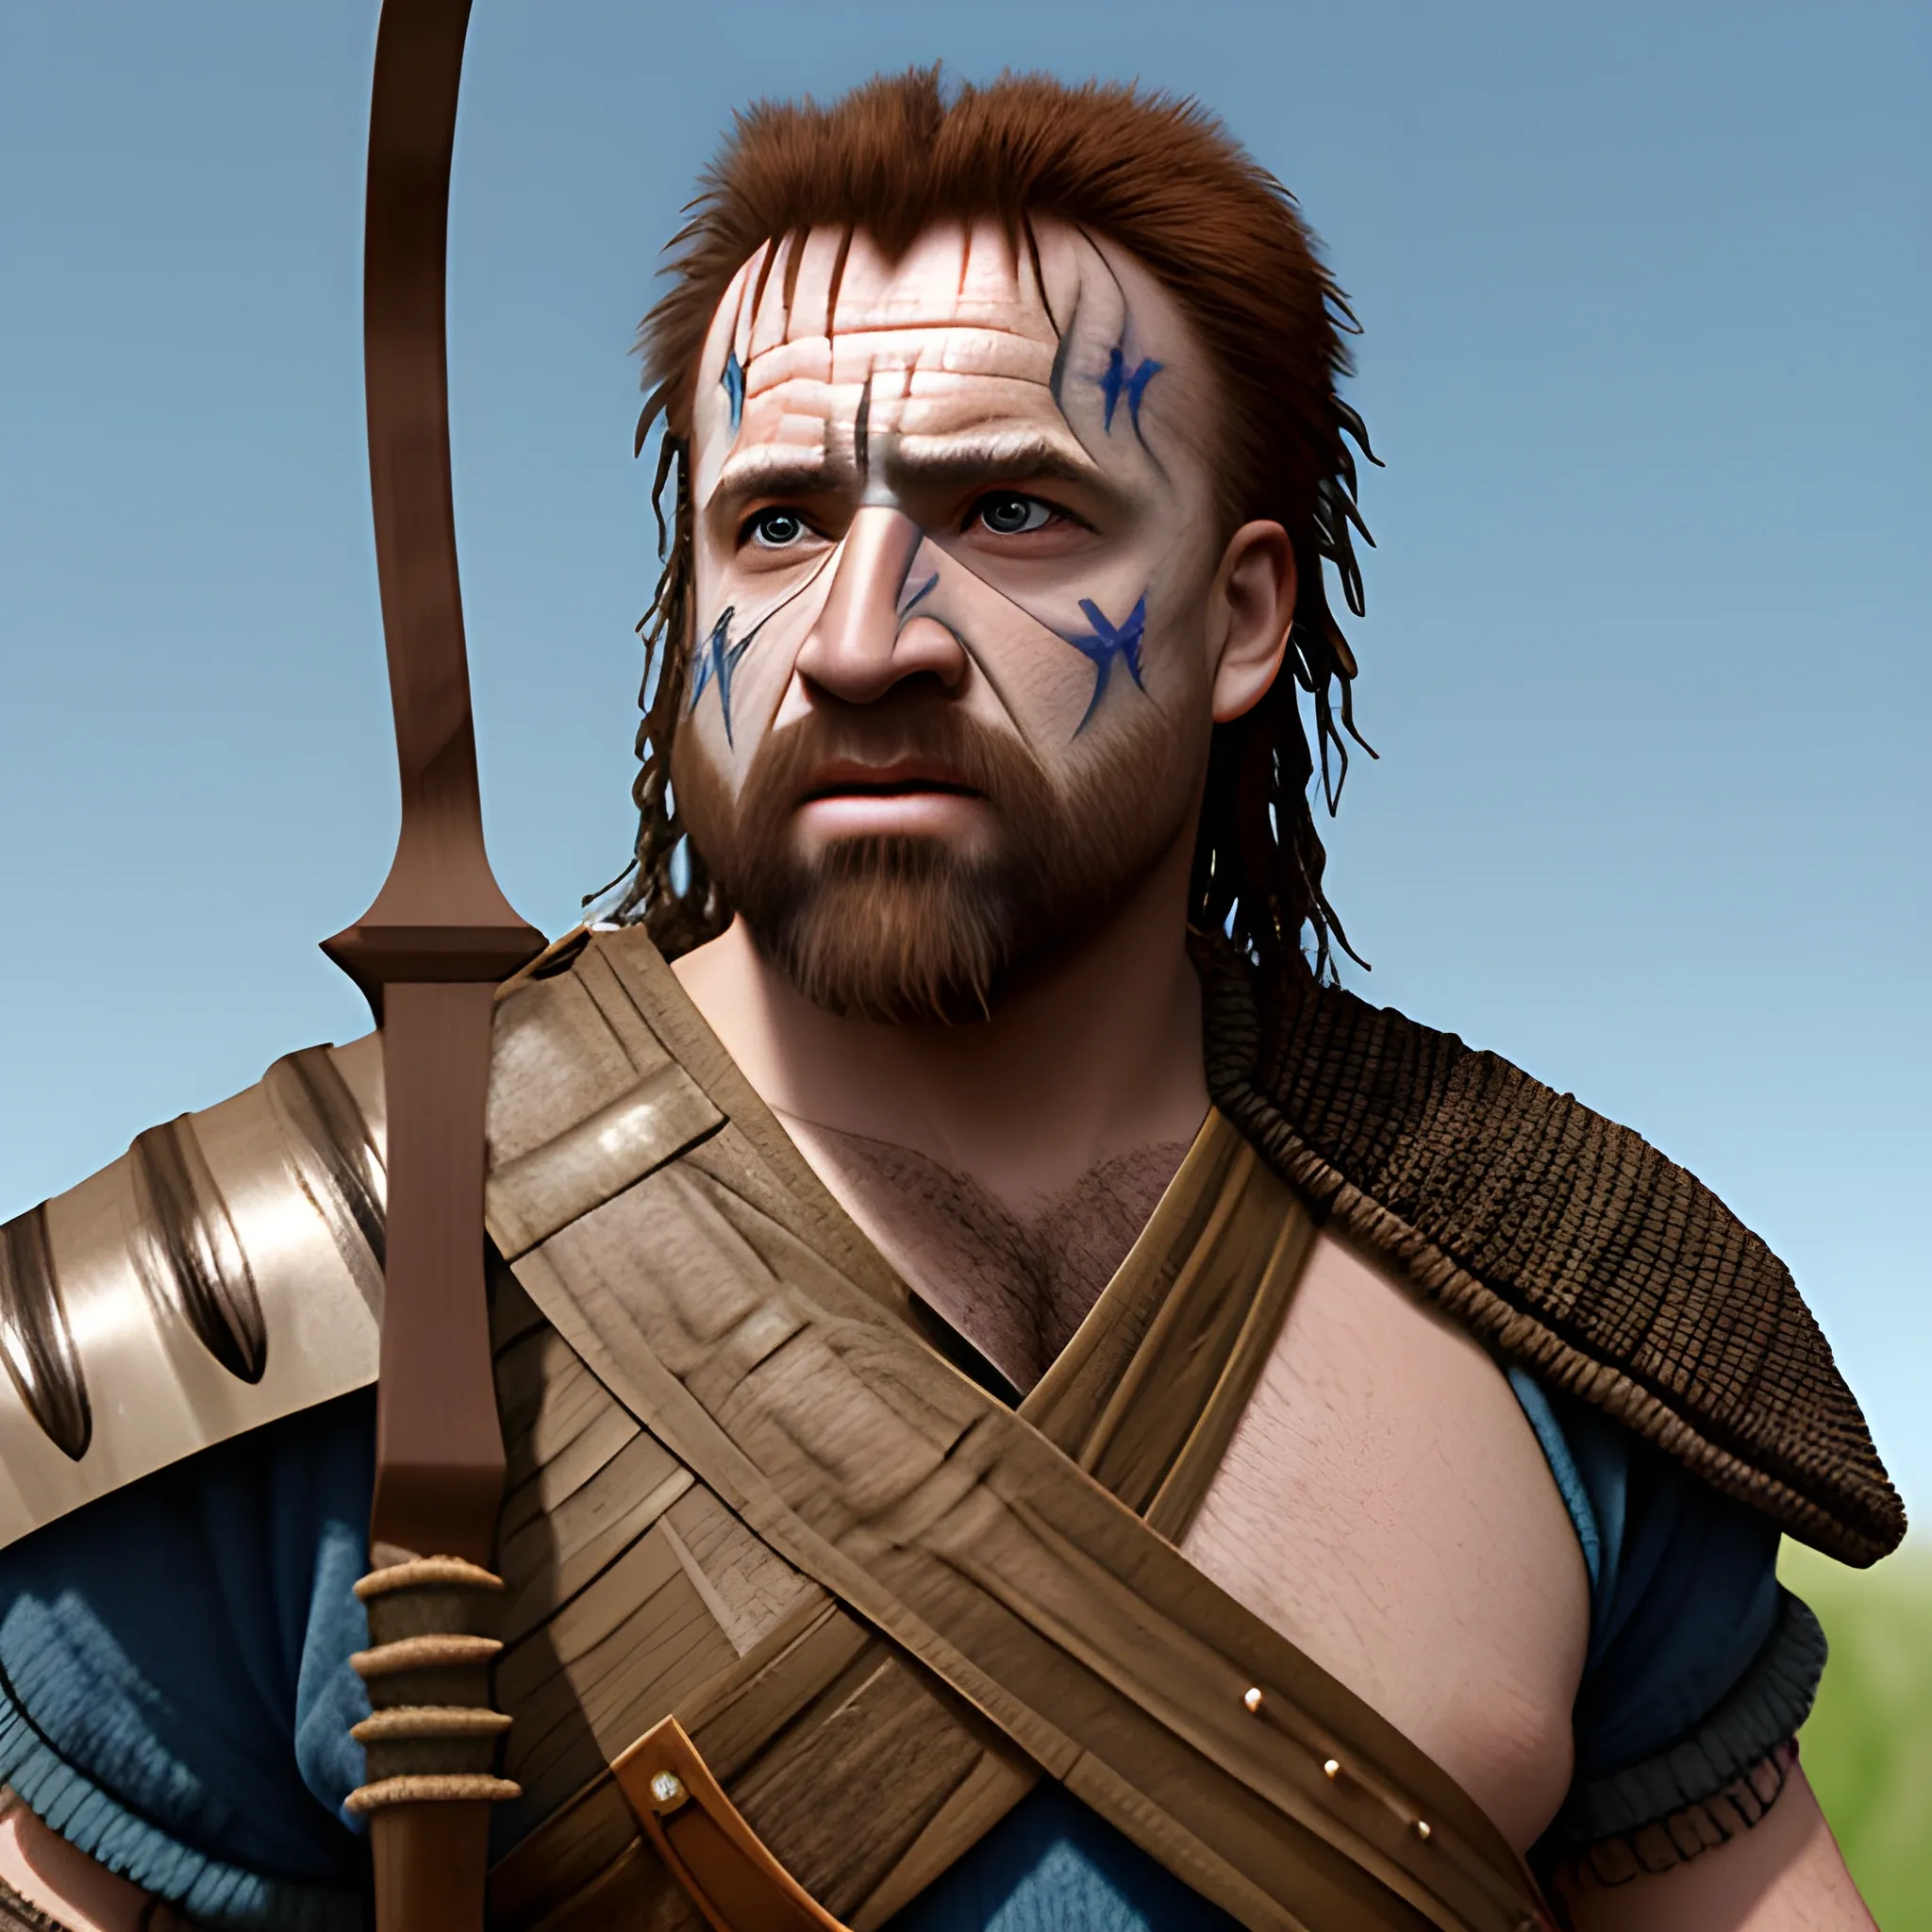 William wallace from Braveheart movie as an African American 3D